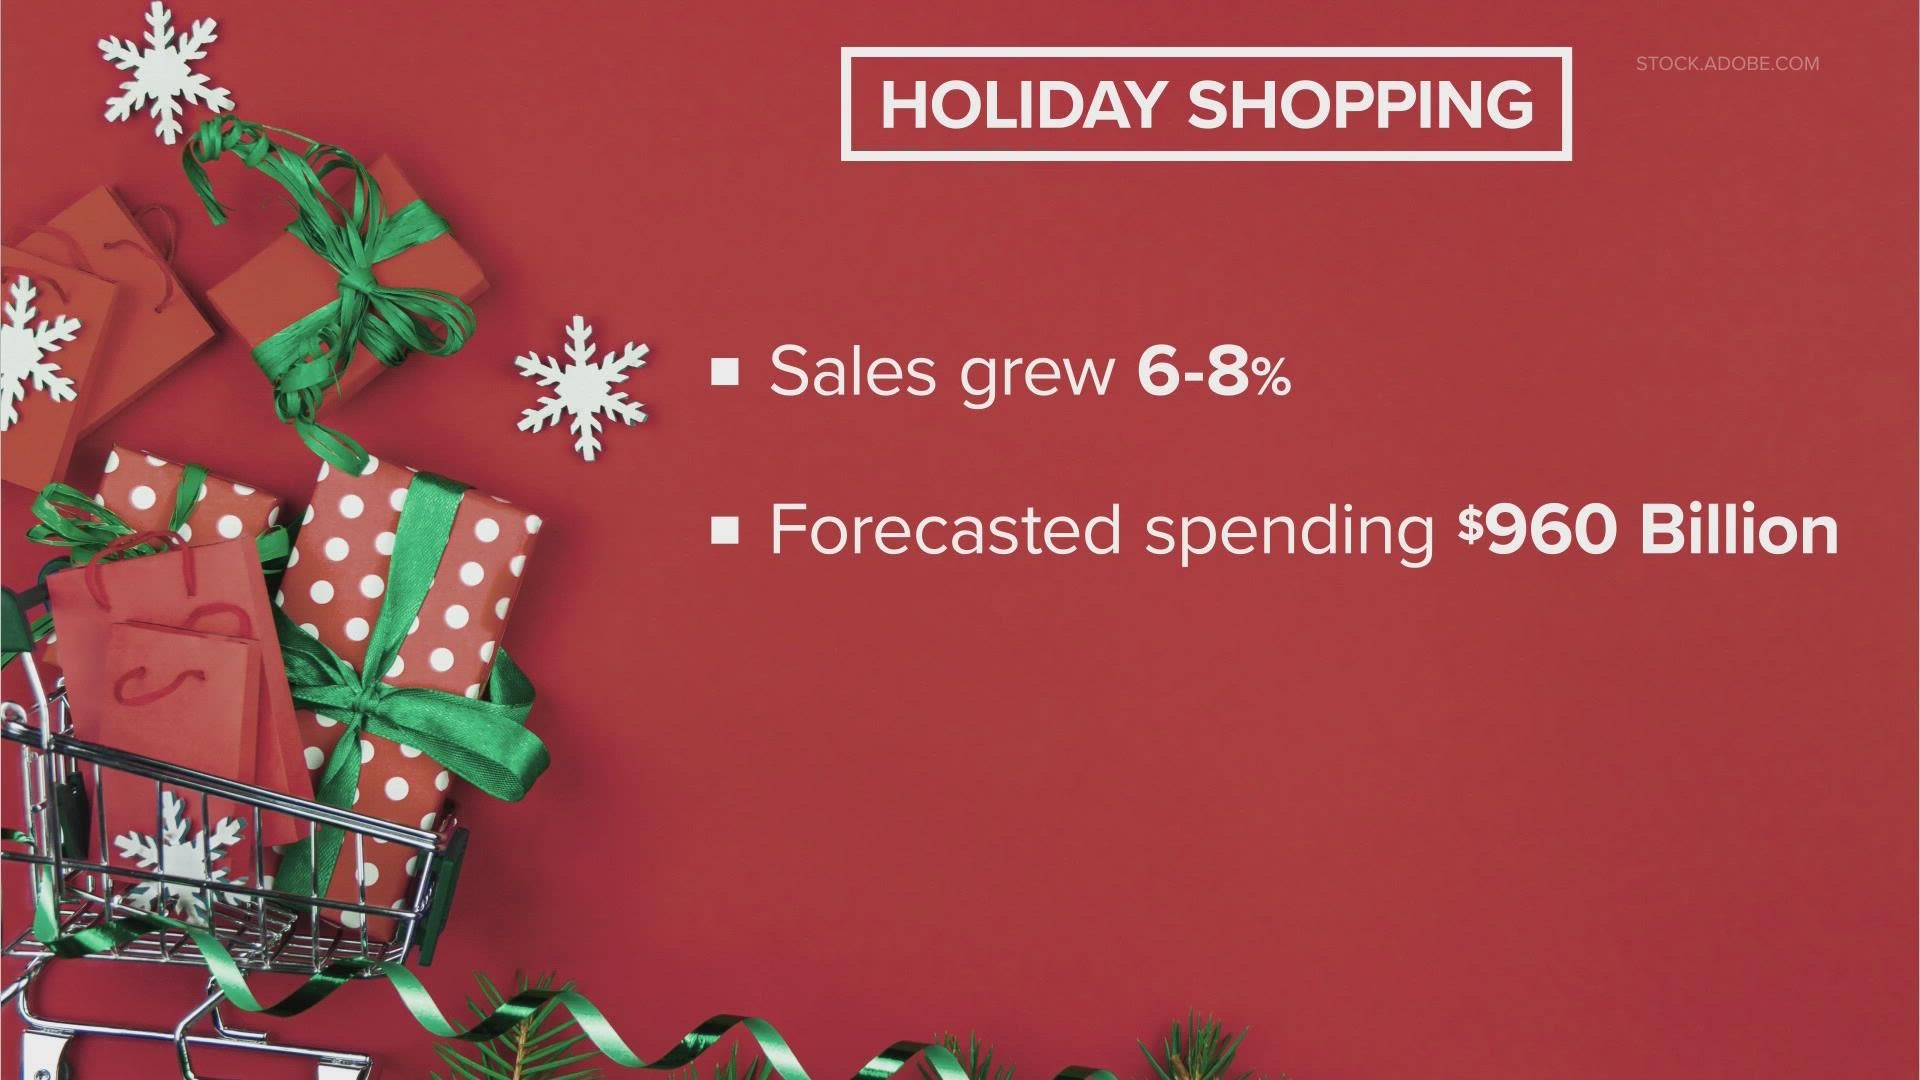 National Retail Federation predicts this year's holiday sales will top last year's by 6 to 8 percent with Americans forecasted to spend $960 billion on holiday gifts